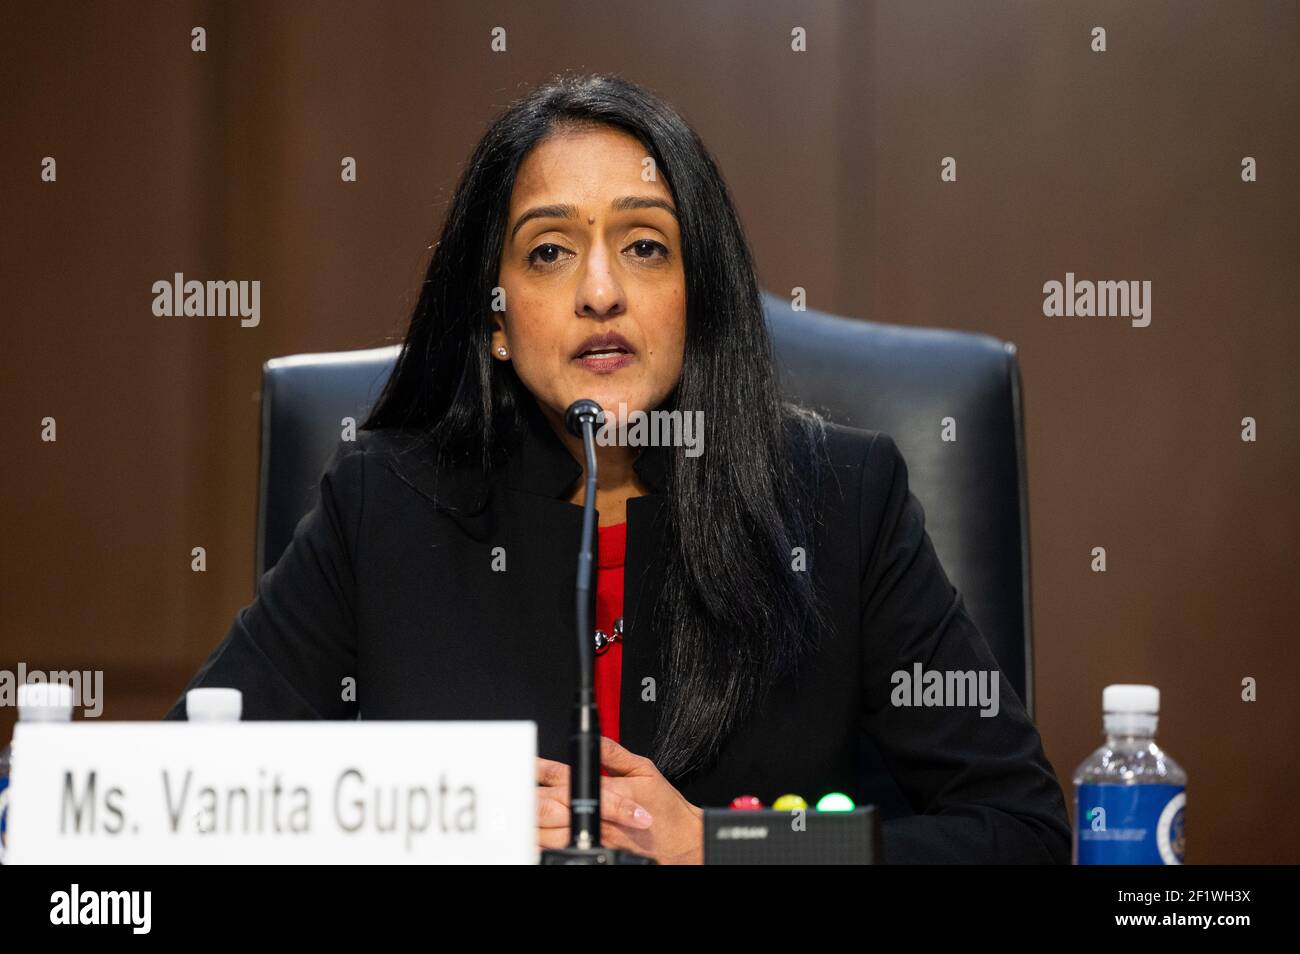 Washington, U.S. 09th Mar, 2021. March 9, 2021 - Washington, DC, United States: Vanita Gupta, nominee to be Associate Attorney General of the Department of Justice, speaking at a hearing of the Senate judiciary Committee. (Photo by Michael Brochstein/Sipa USA) Credit: Sipa USA/Alamy Live News Stock Photo